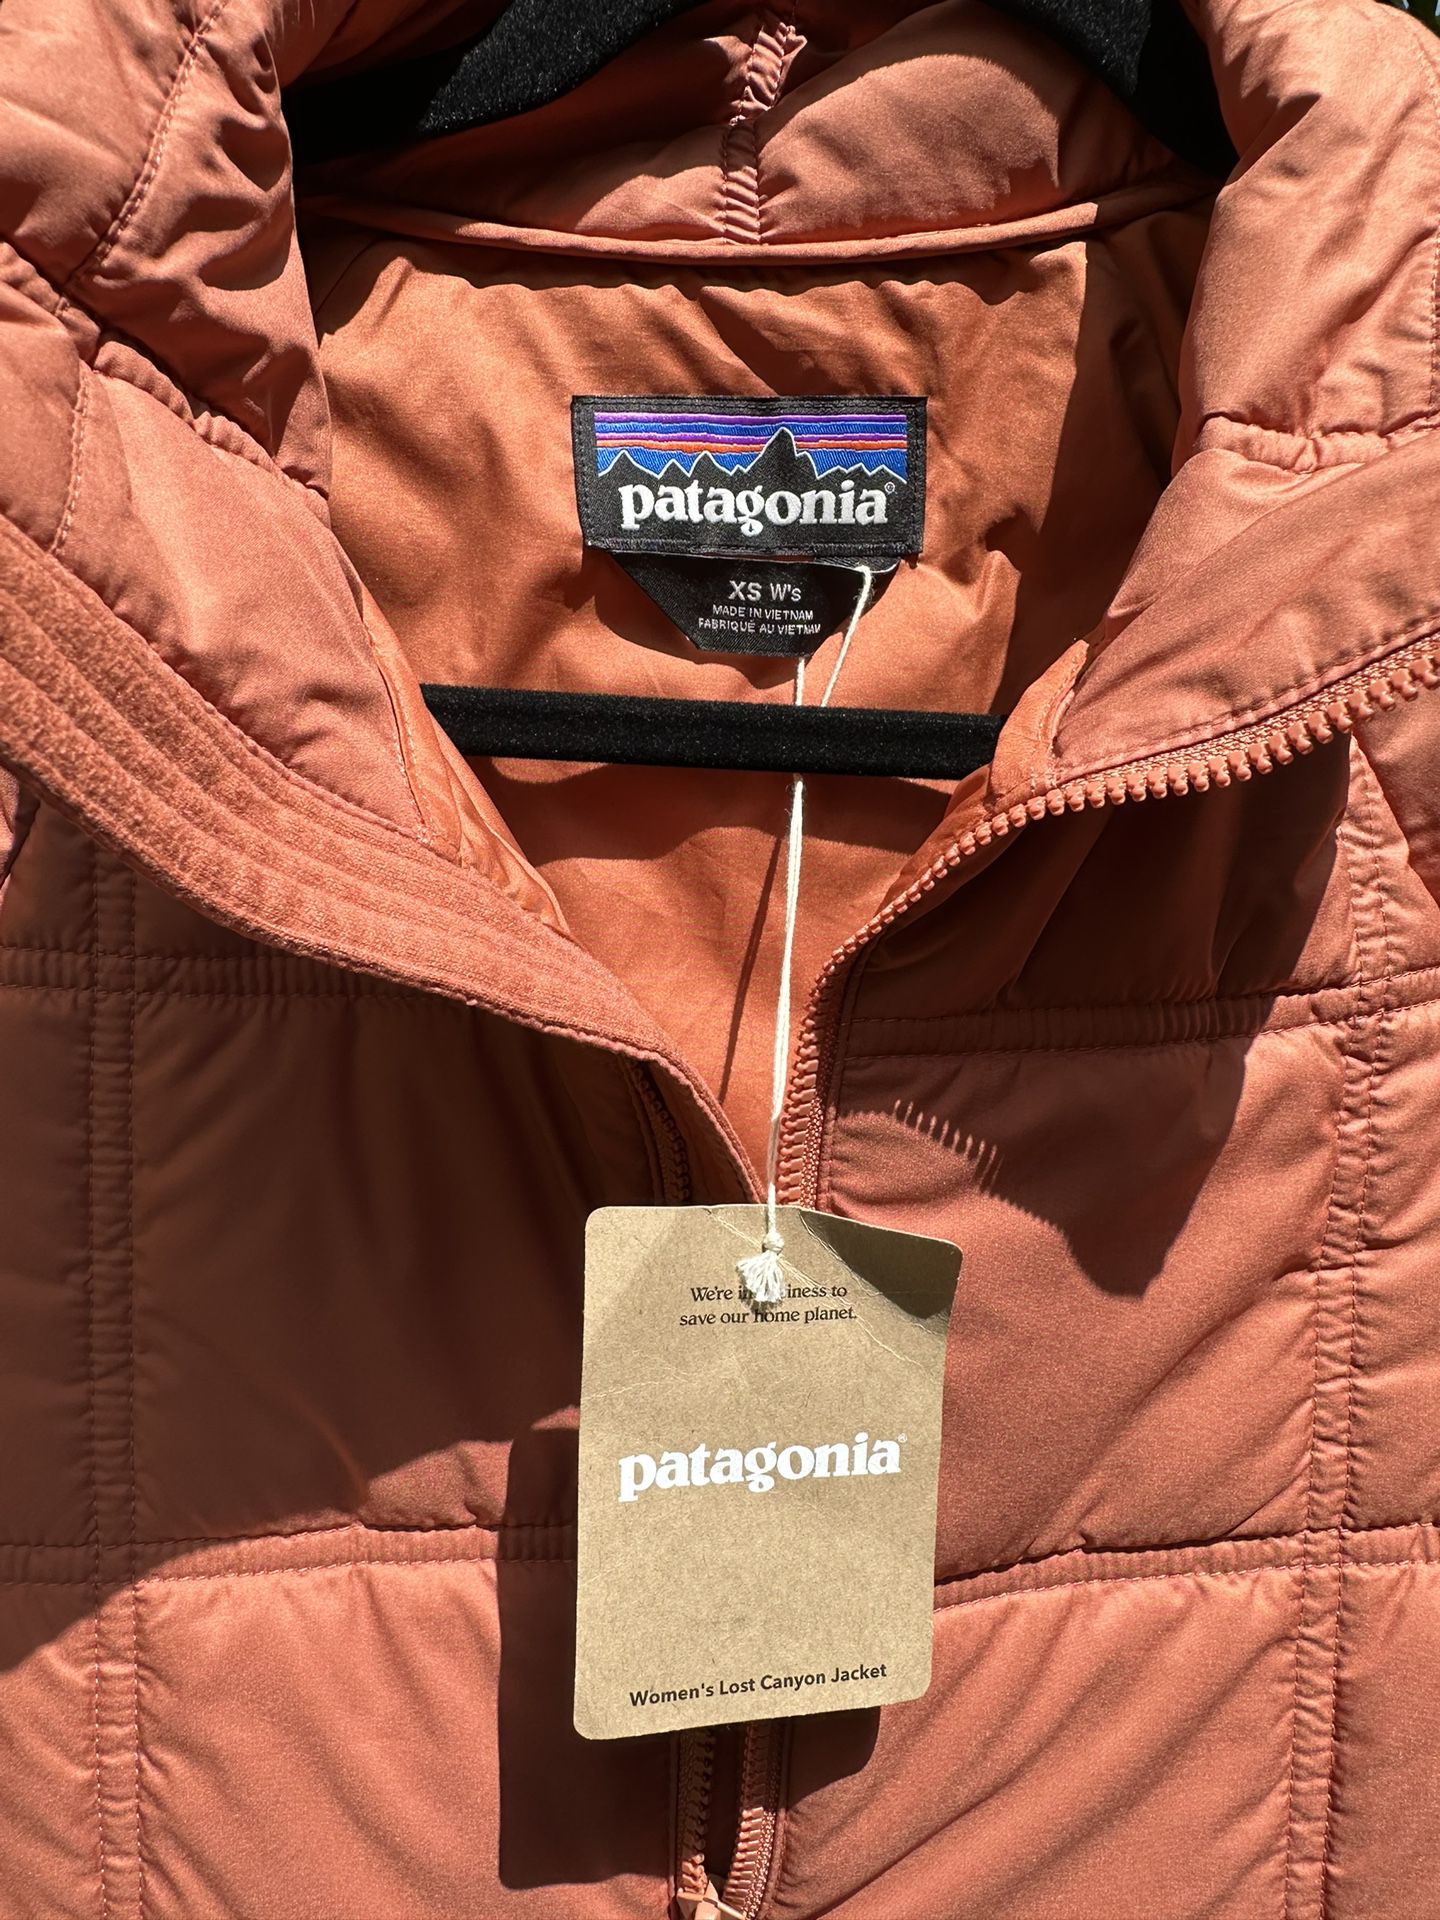 NEW: Patagonia Women’s Lost Canyon Jacket XS